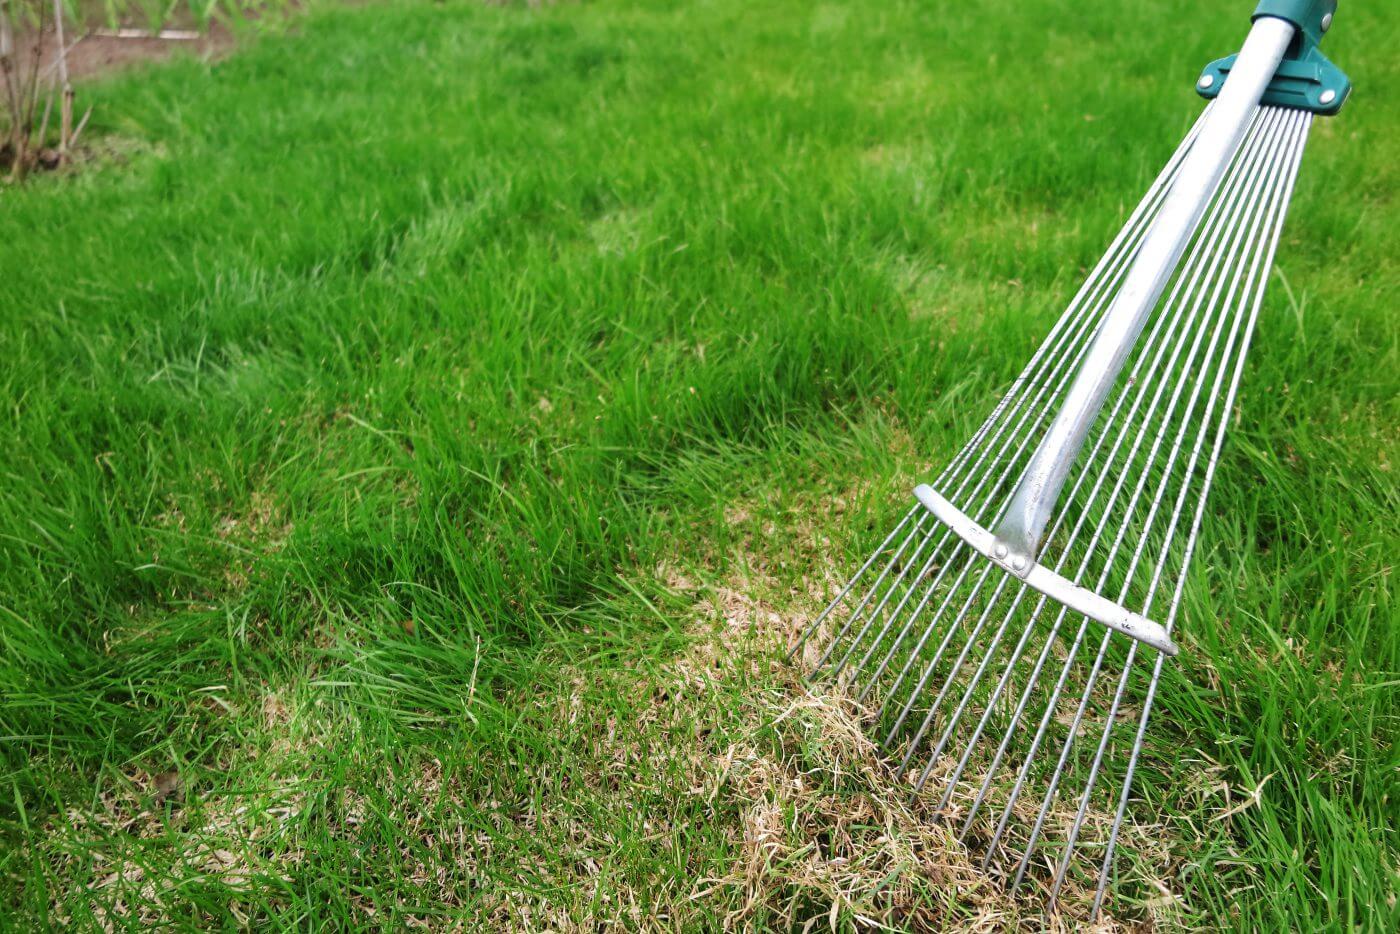 Winter Lawn Care to Remove Pests and Prepare for the Spring